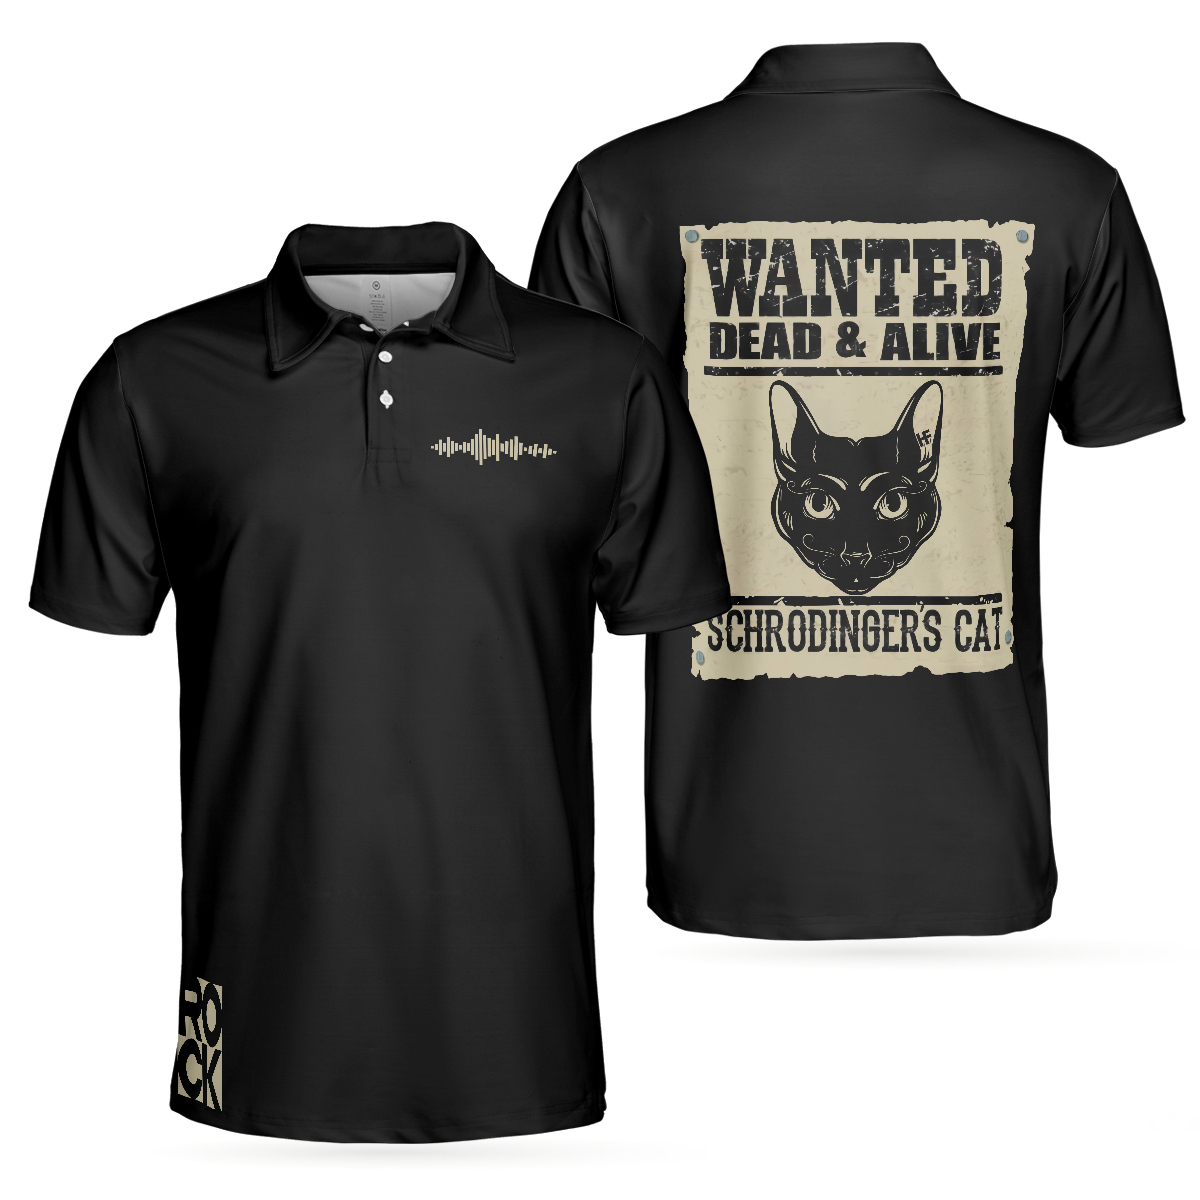 Wanted Dead & Alive Schrodinger's Cat Black Polo Shirt For Men - Perfect Gift For Men, Cat Lovers